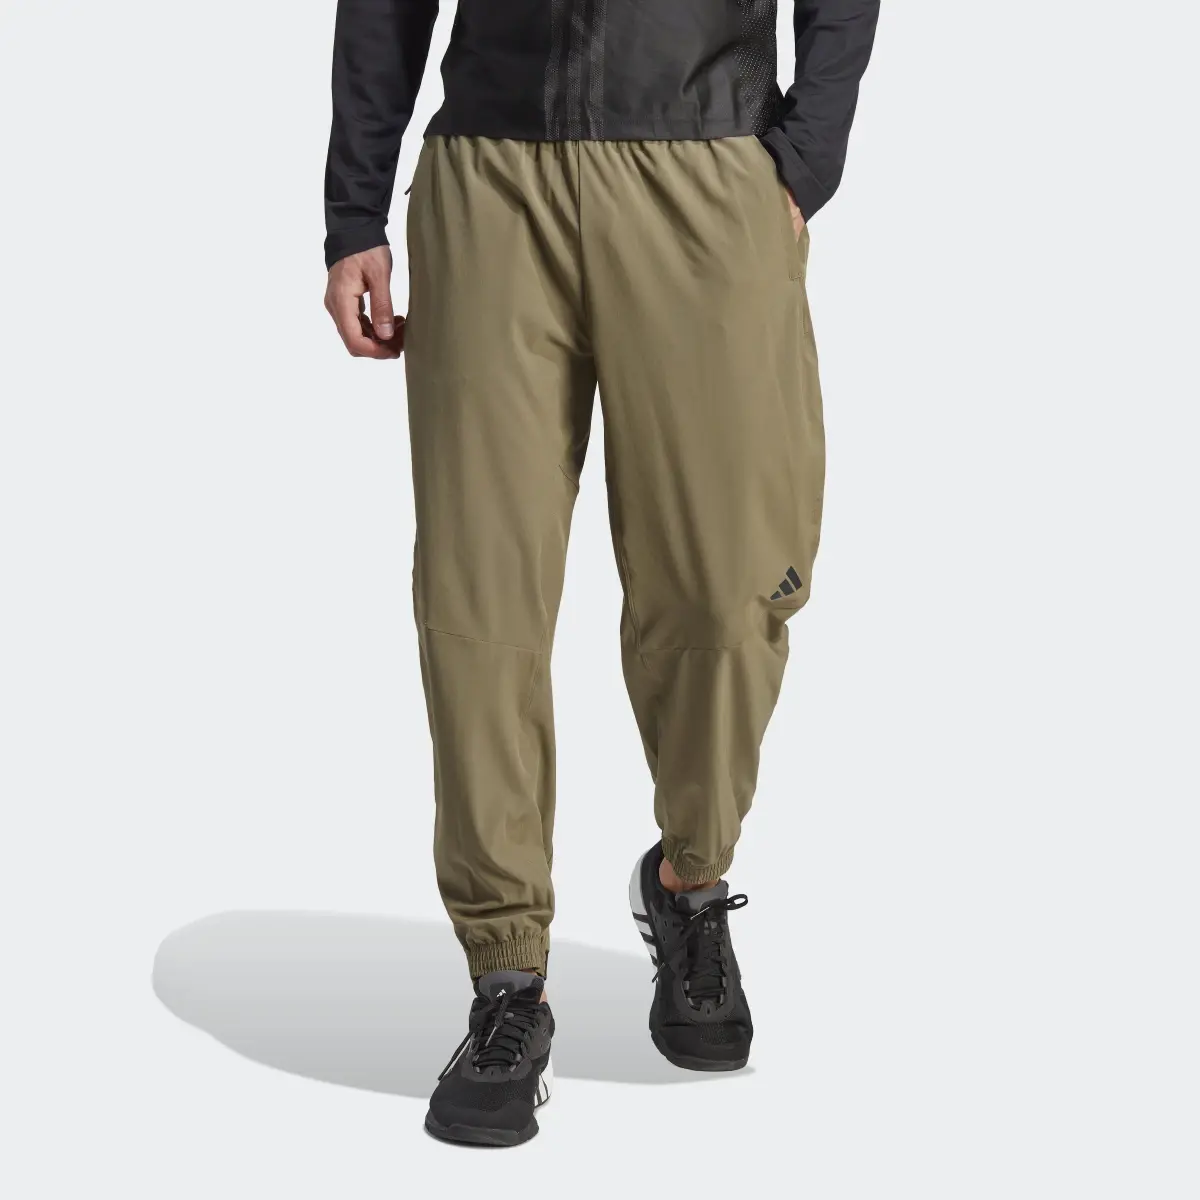 Adidas Designed for Training Pro Series Strength Joggers. 1